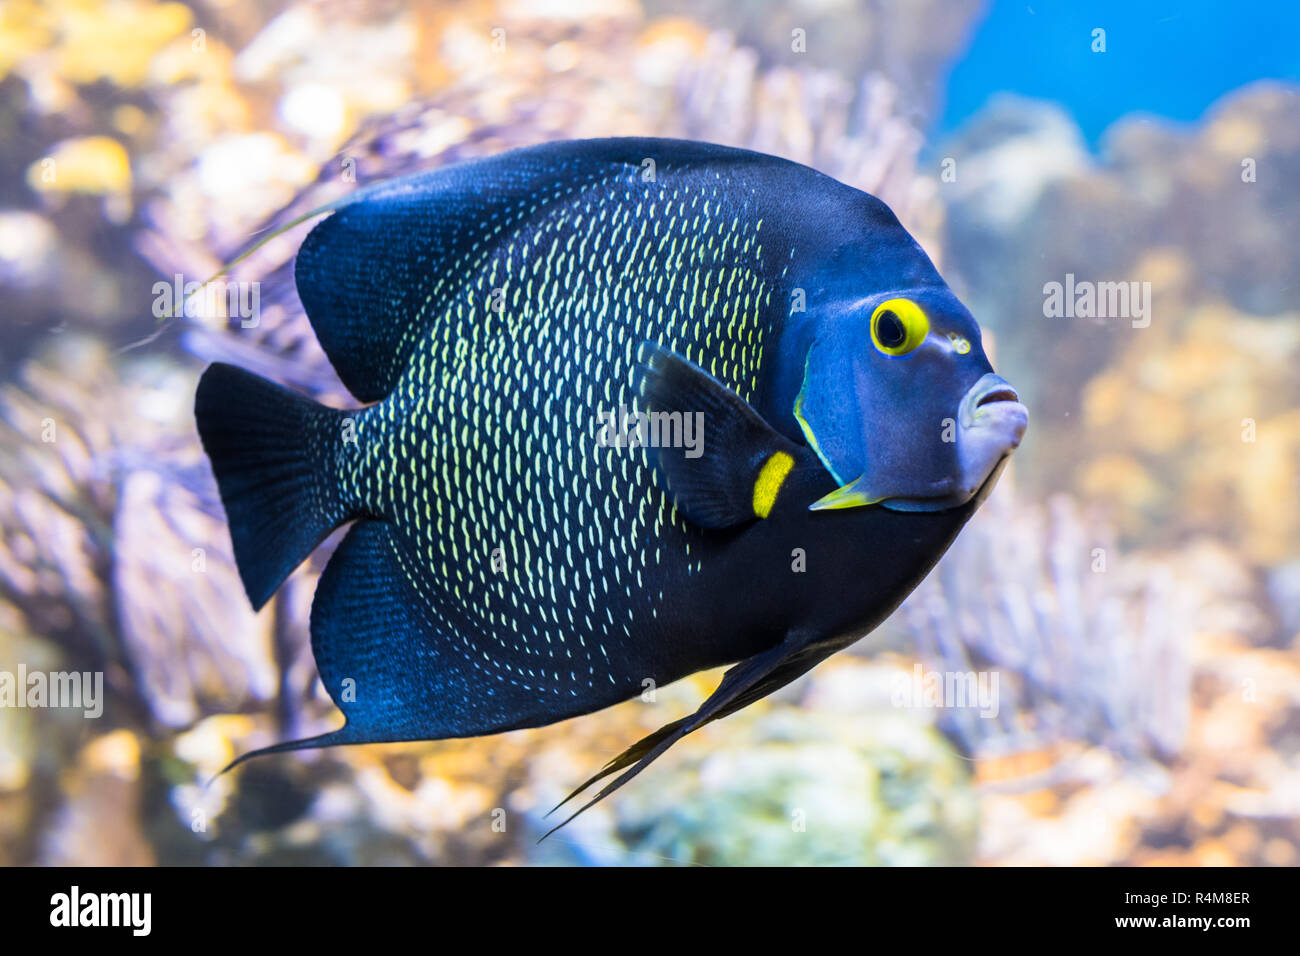 King angelfish Holacanthus passer , also known as the passer angelfish. Stock Photo